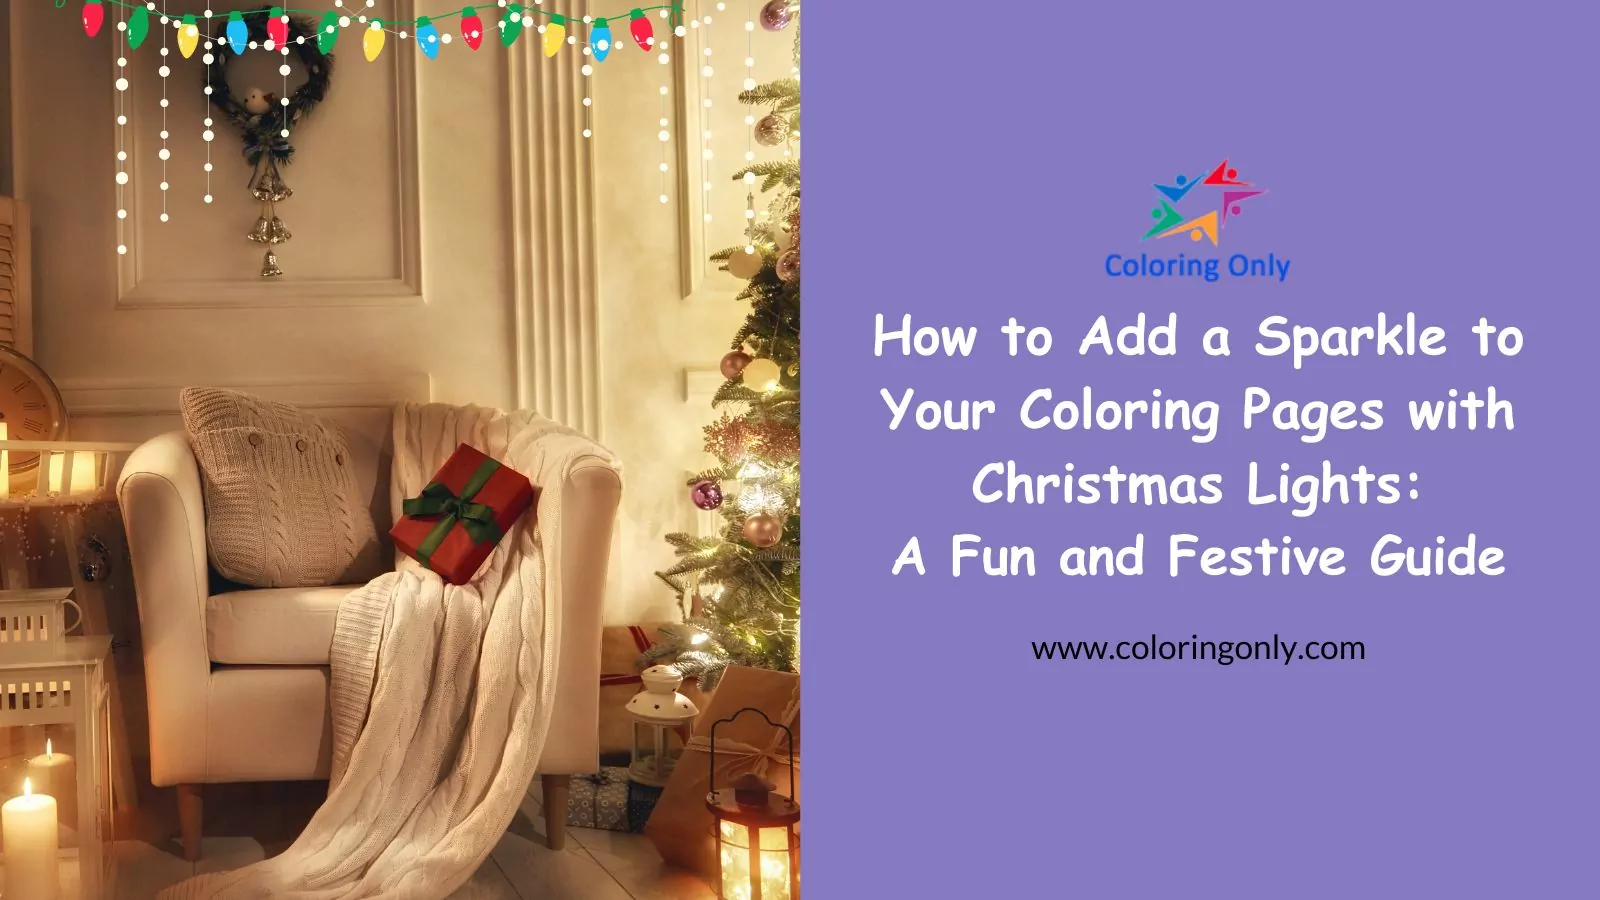 How to Add a Sparkle to Your Coloring Pages with Christmas Lights: A Fun and Festive Guide